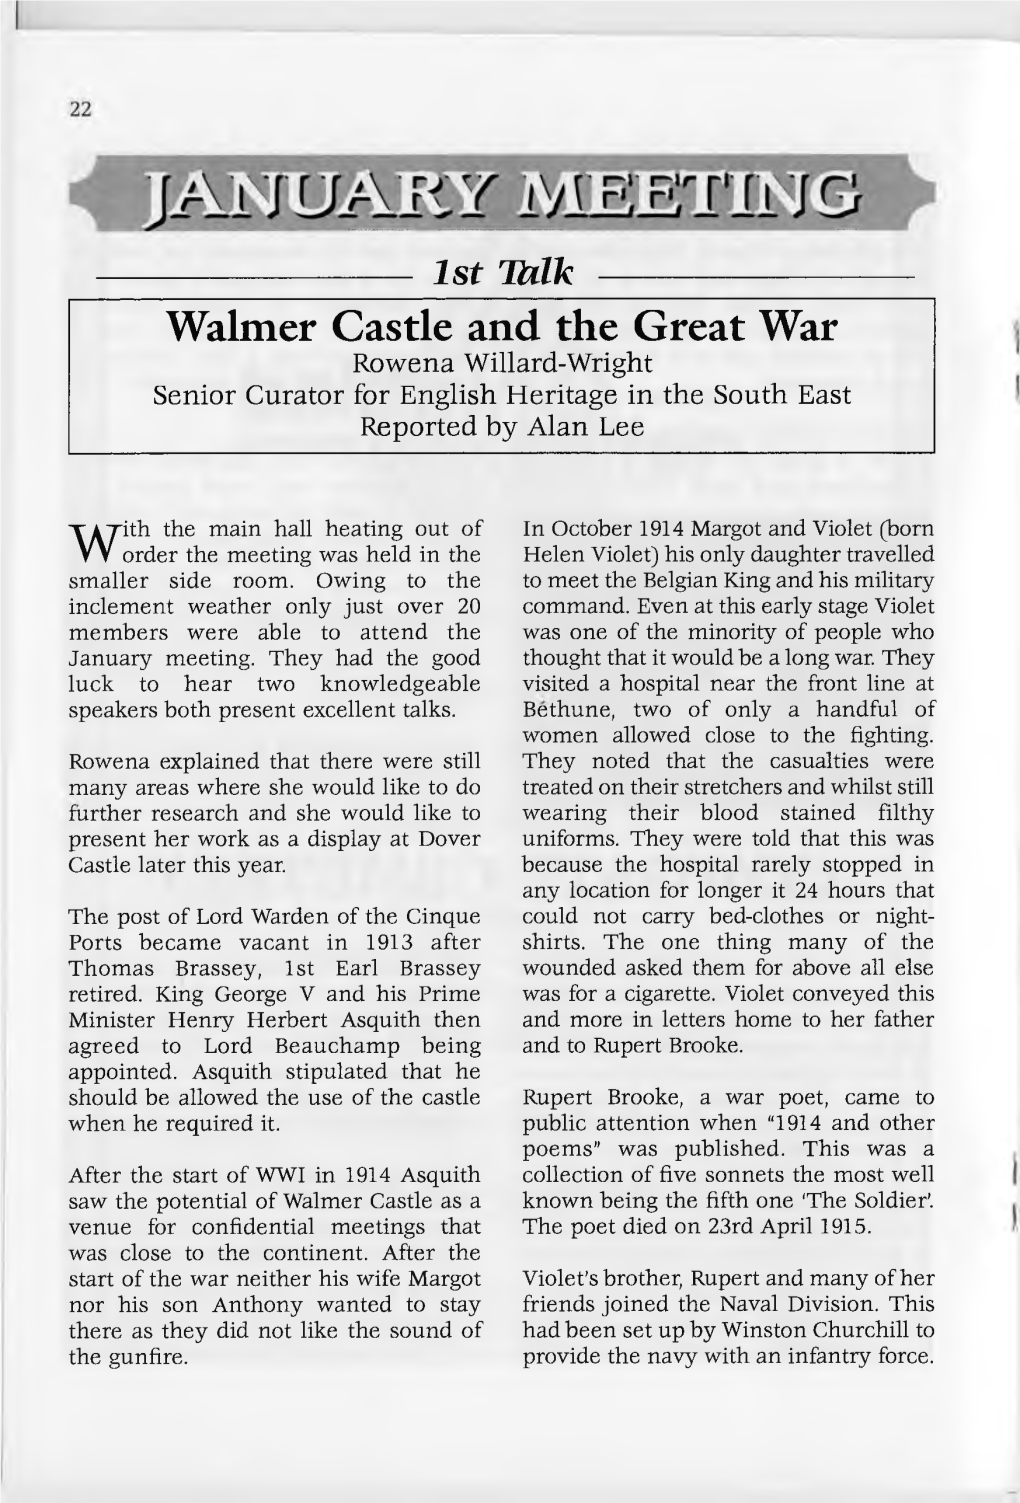 Walmer Castle and the Great War Rowena Willard-Wright Senior Curator for English Heritage in the South East Reported by Alan Lee